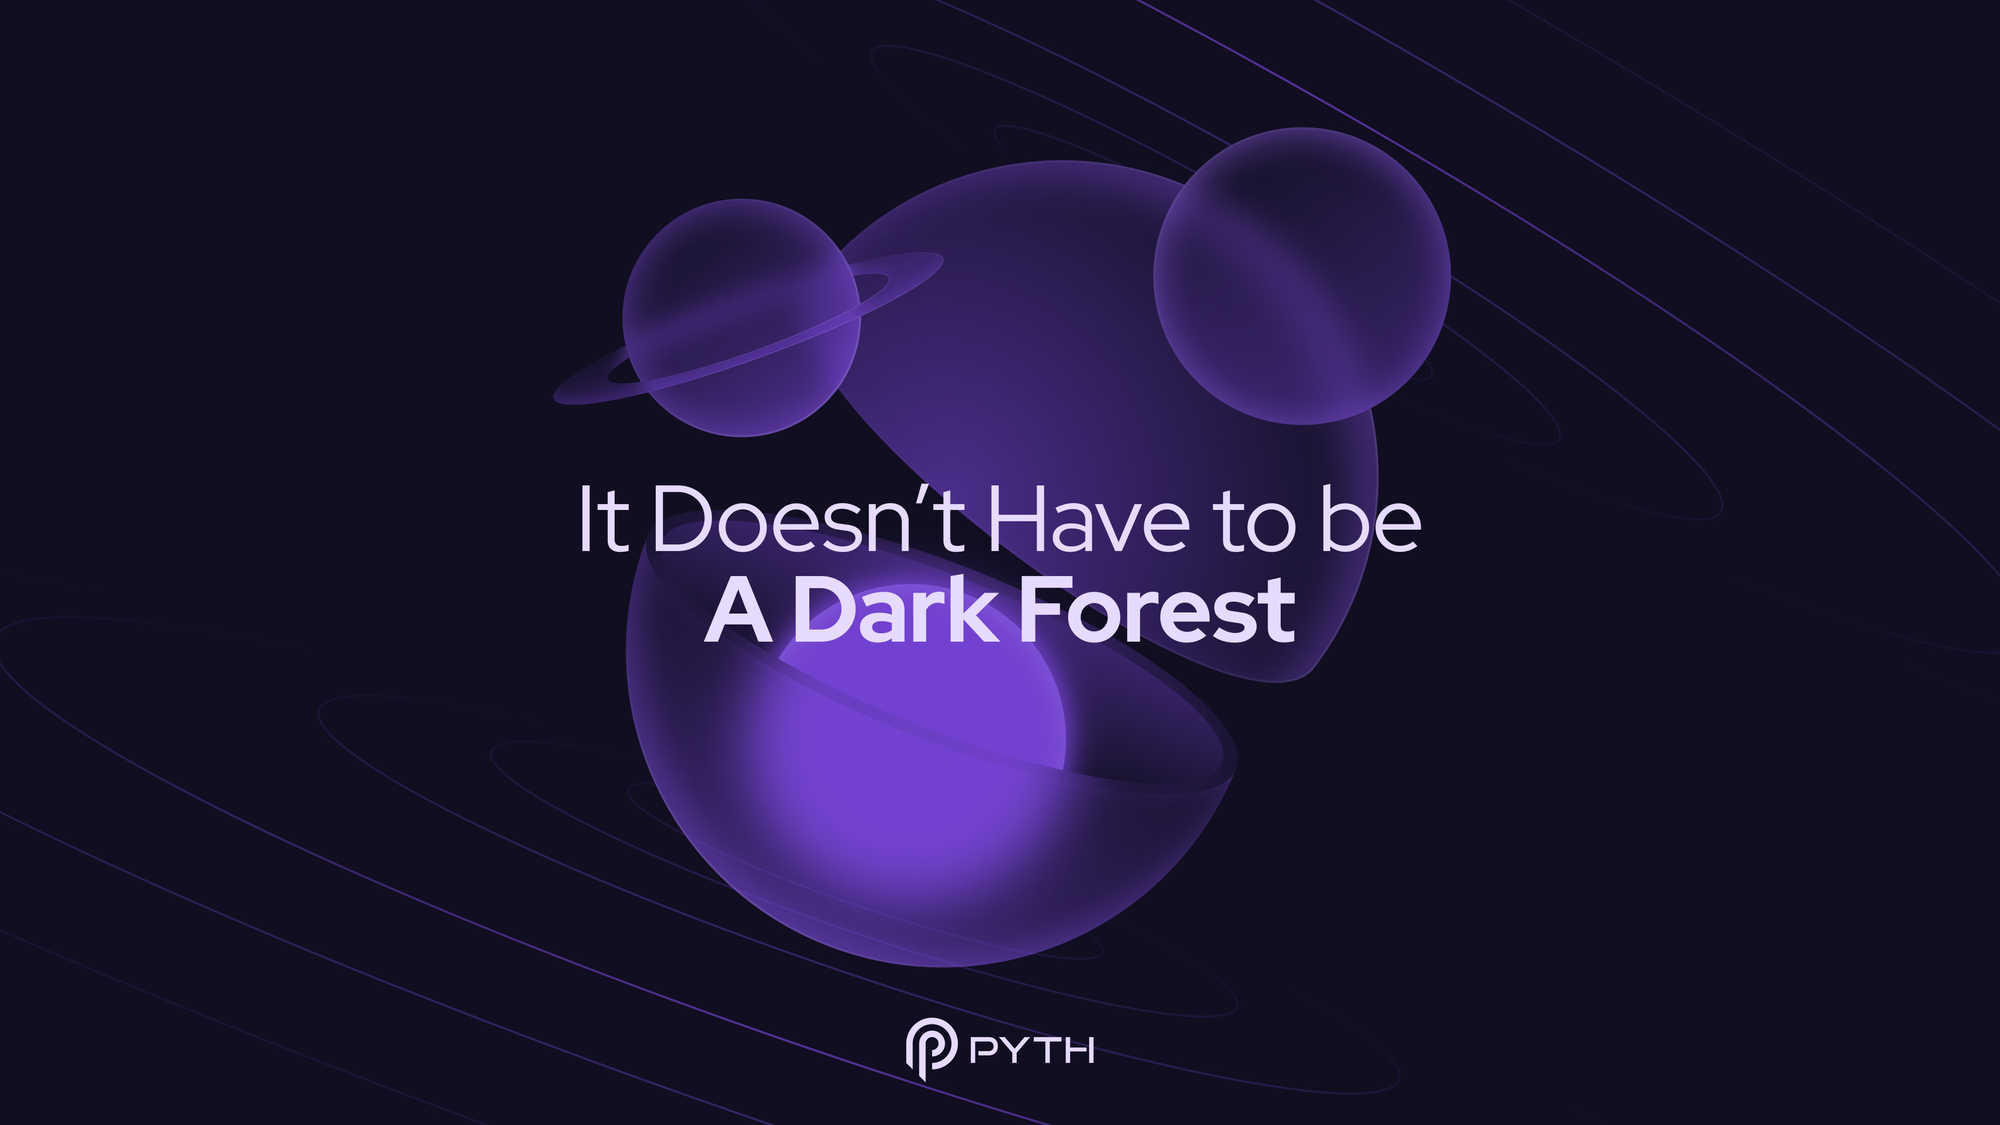 It Doesn’t Have to be a Dark Forest…